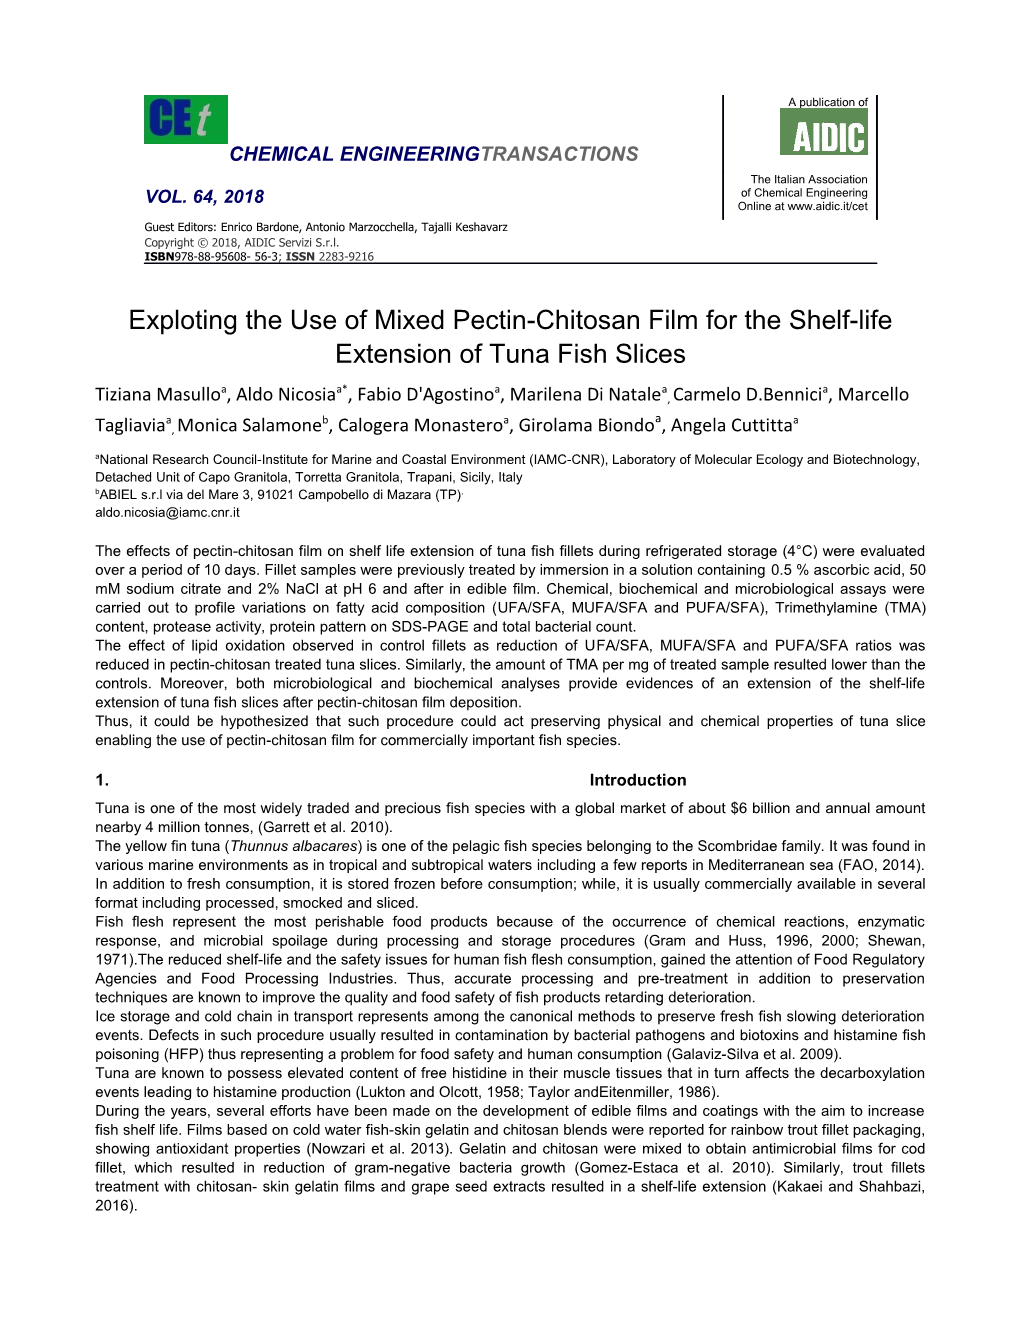 Exploting the Use of Mixed Pectin-Chitosan Film for the Shelf-Life Extension of Tuna Fish Slices